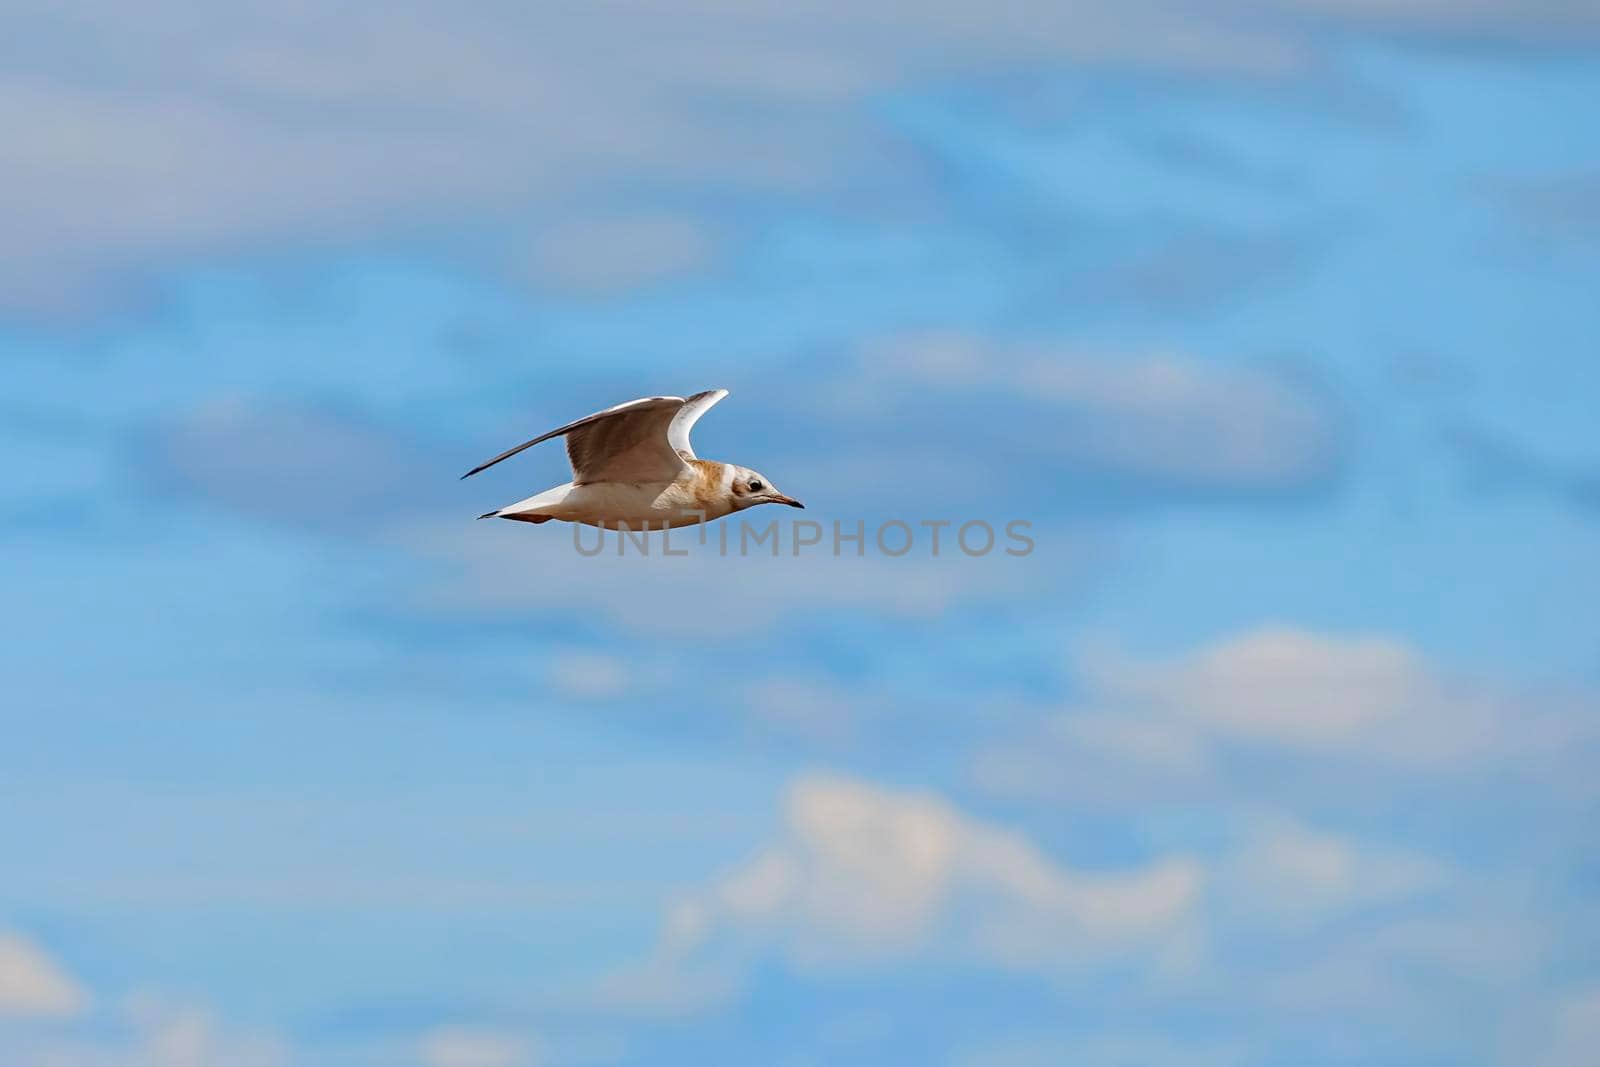 Seagull flying in the sky